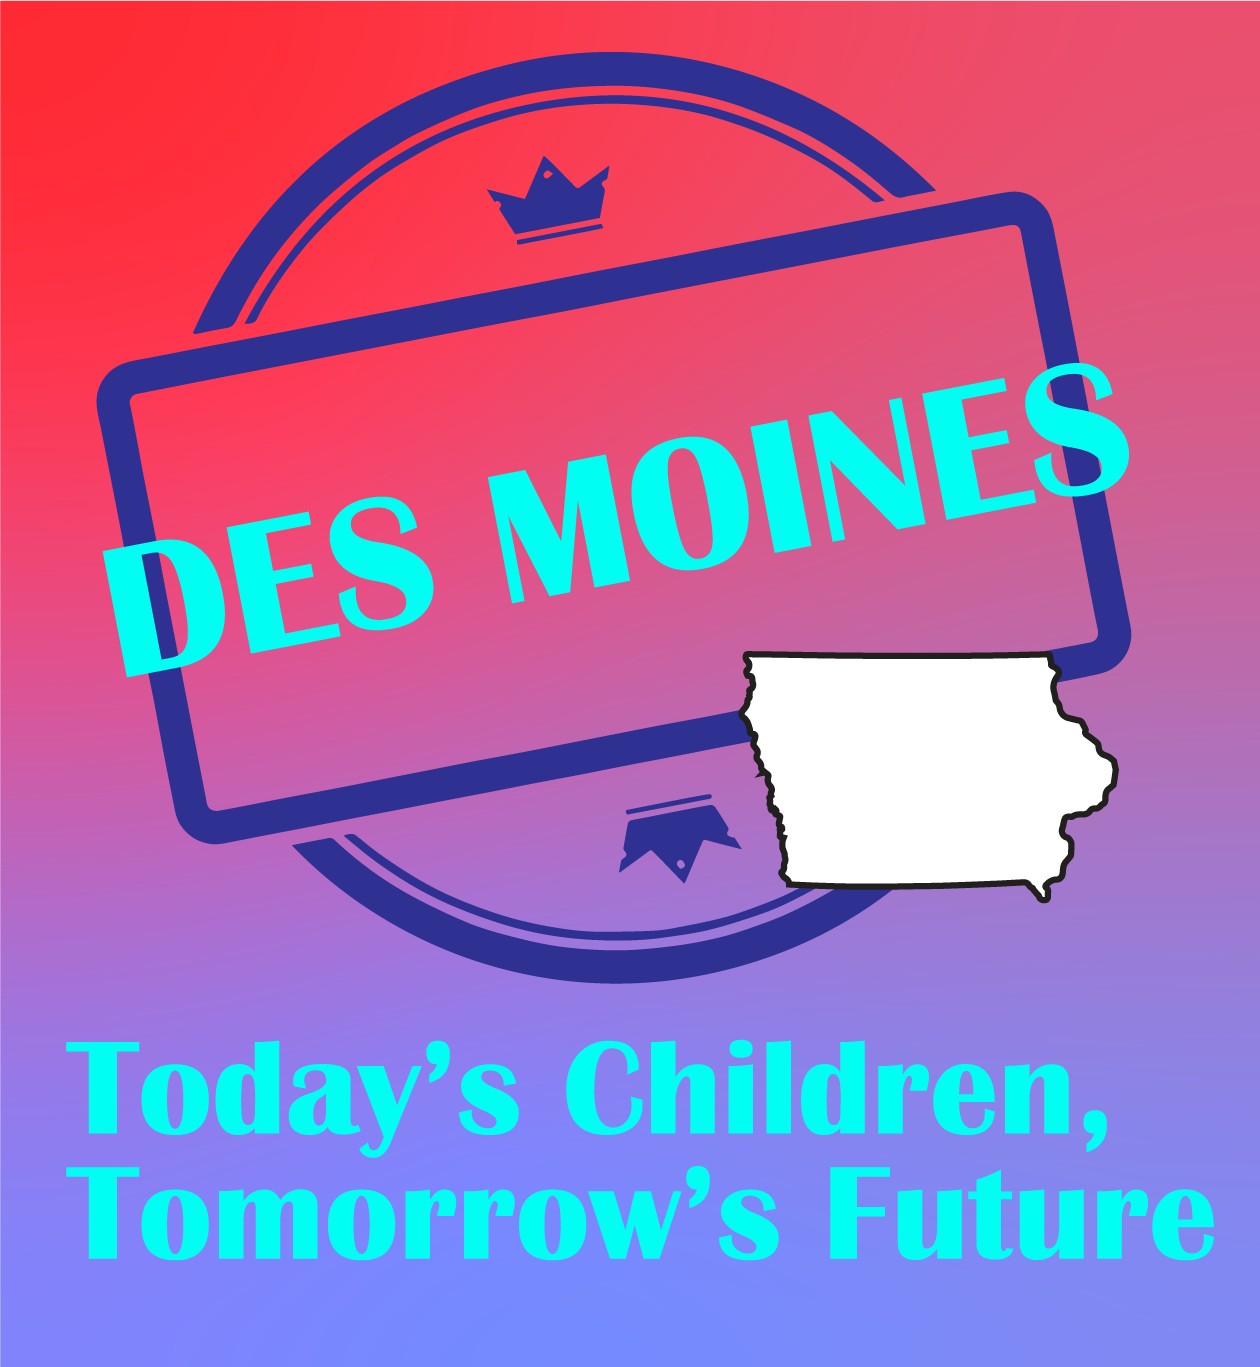 Image for Today's Children Tomorrow's Future - Des Moines